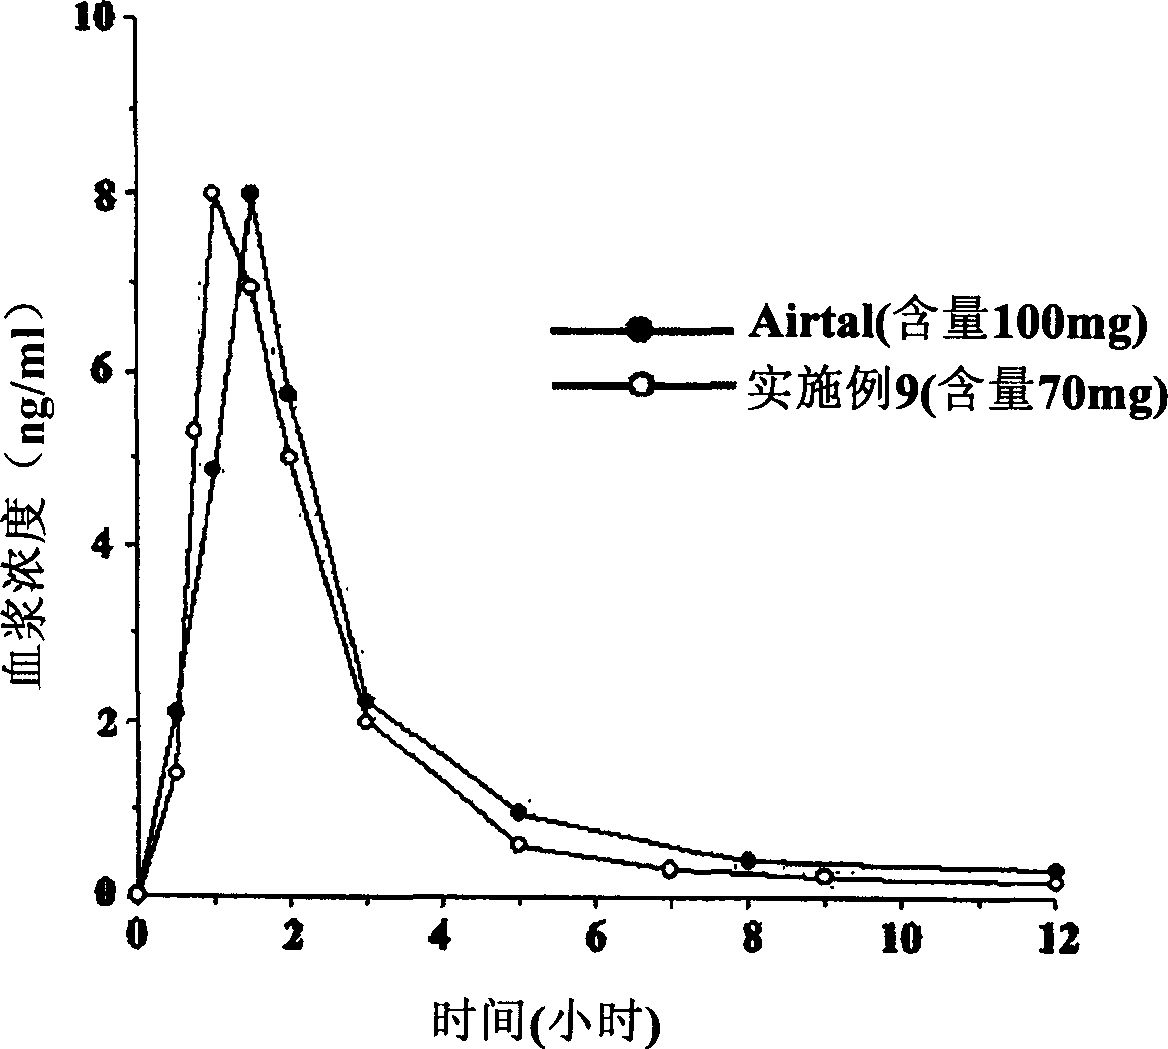 Compositions and preparation methods for bioavailable oral aceclofenac dosage forms